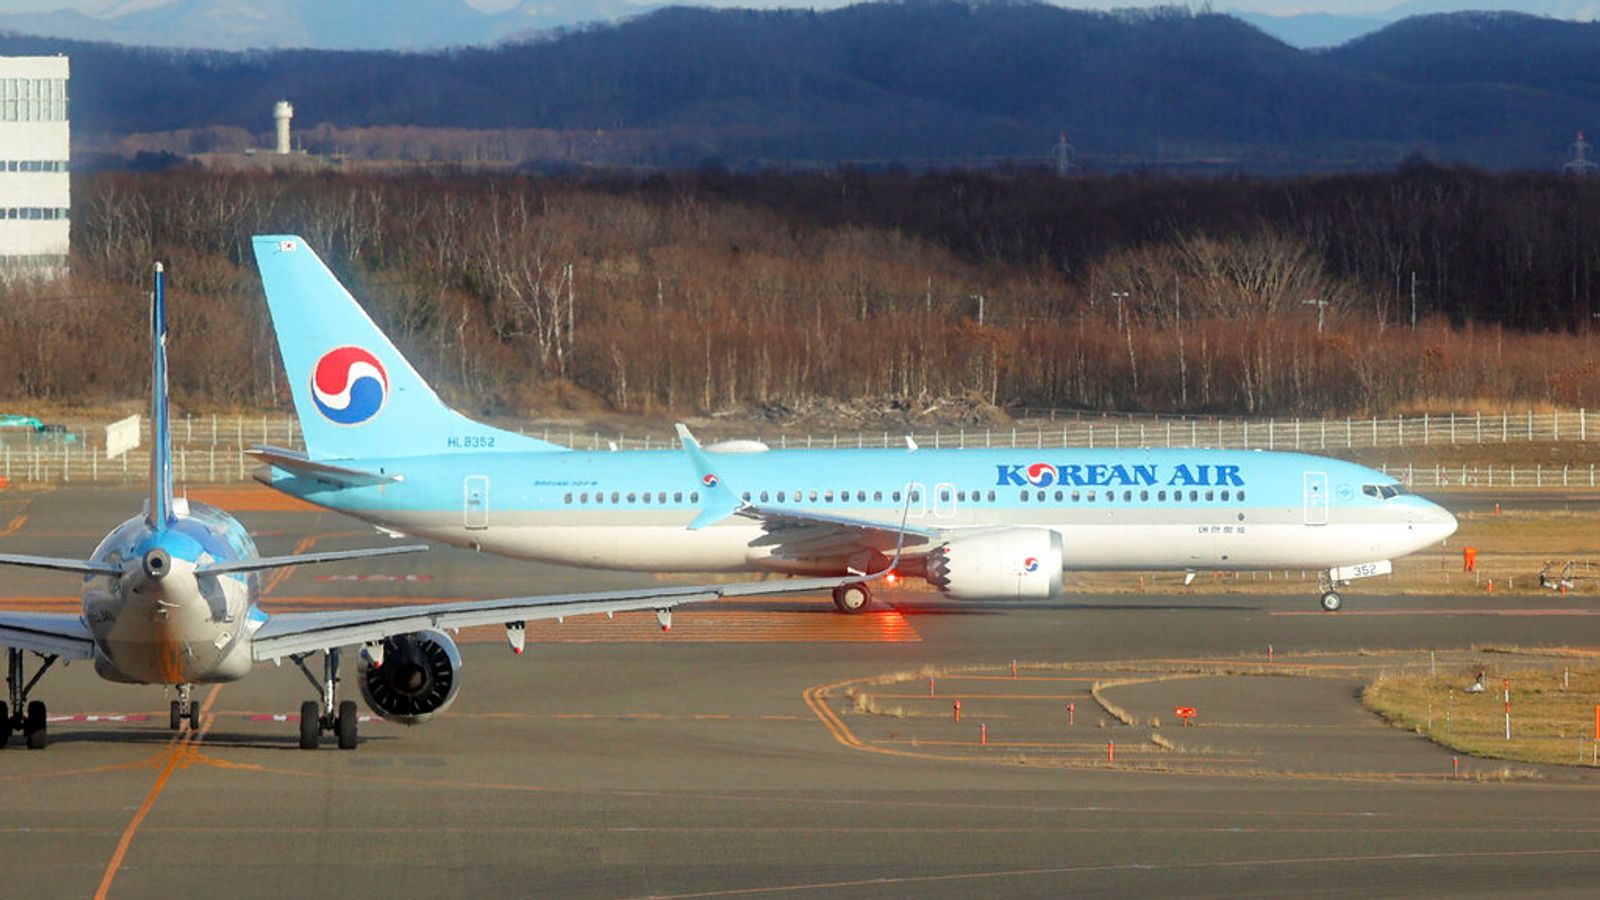 Korean Air Airliner Strikes Cathay Pacific Plane at Japanese Airport